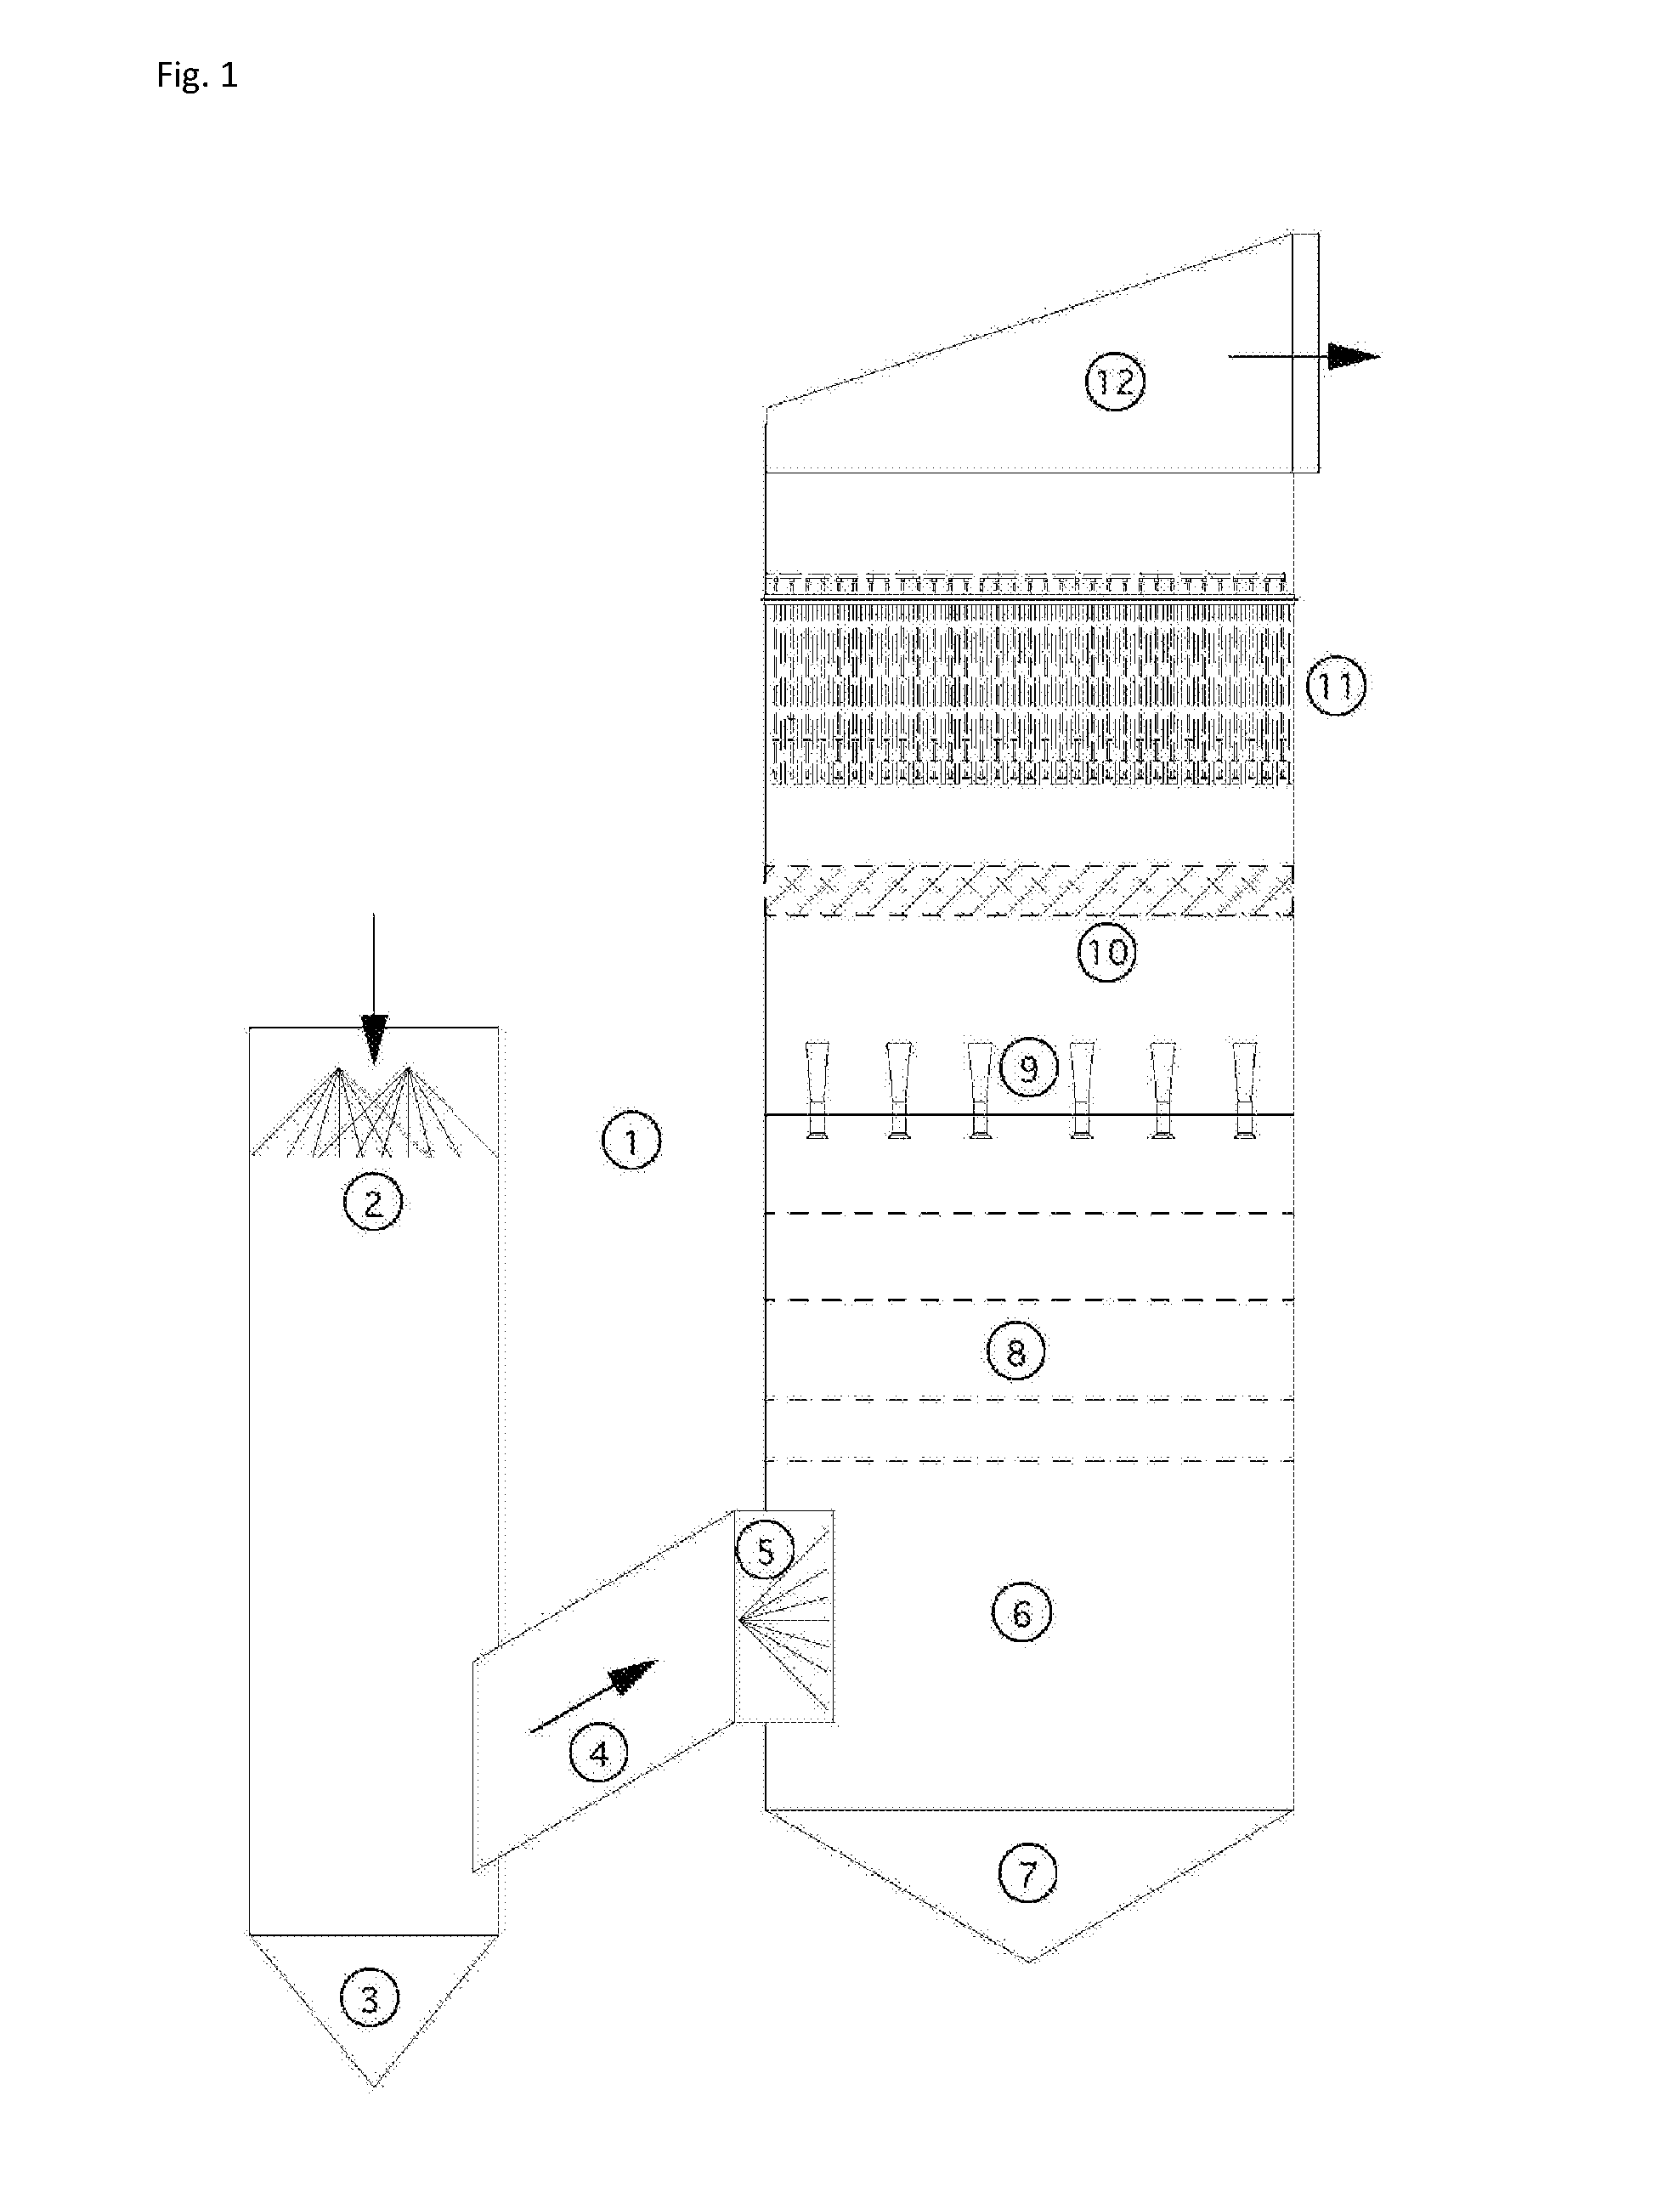 An apparatus and method for particulate capture from gas streams and a method of removing soluble particulate from a gas